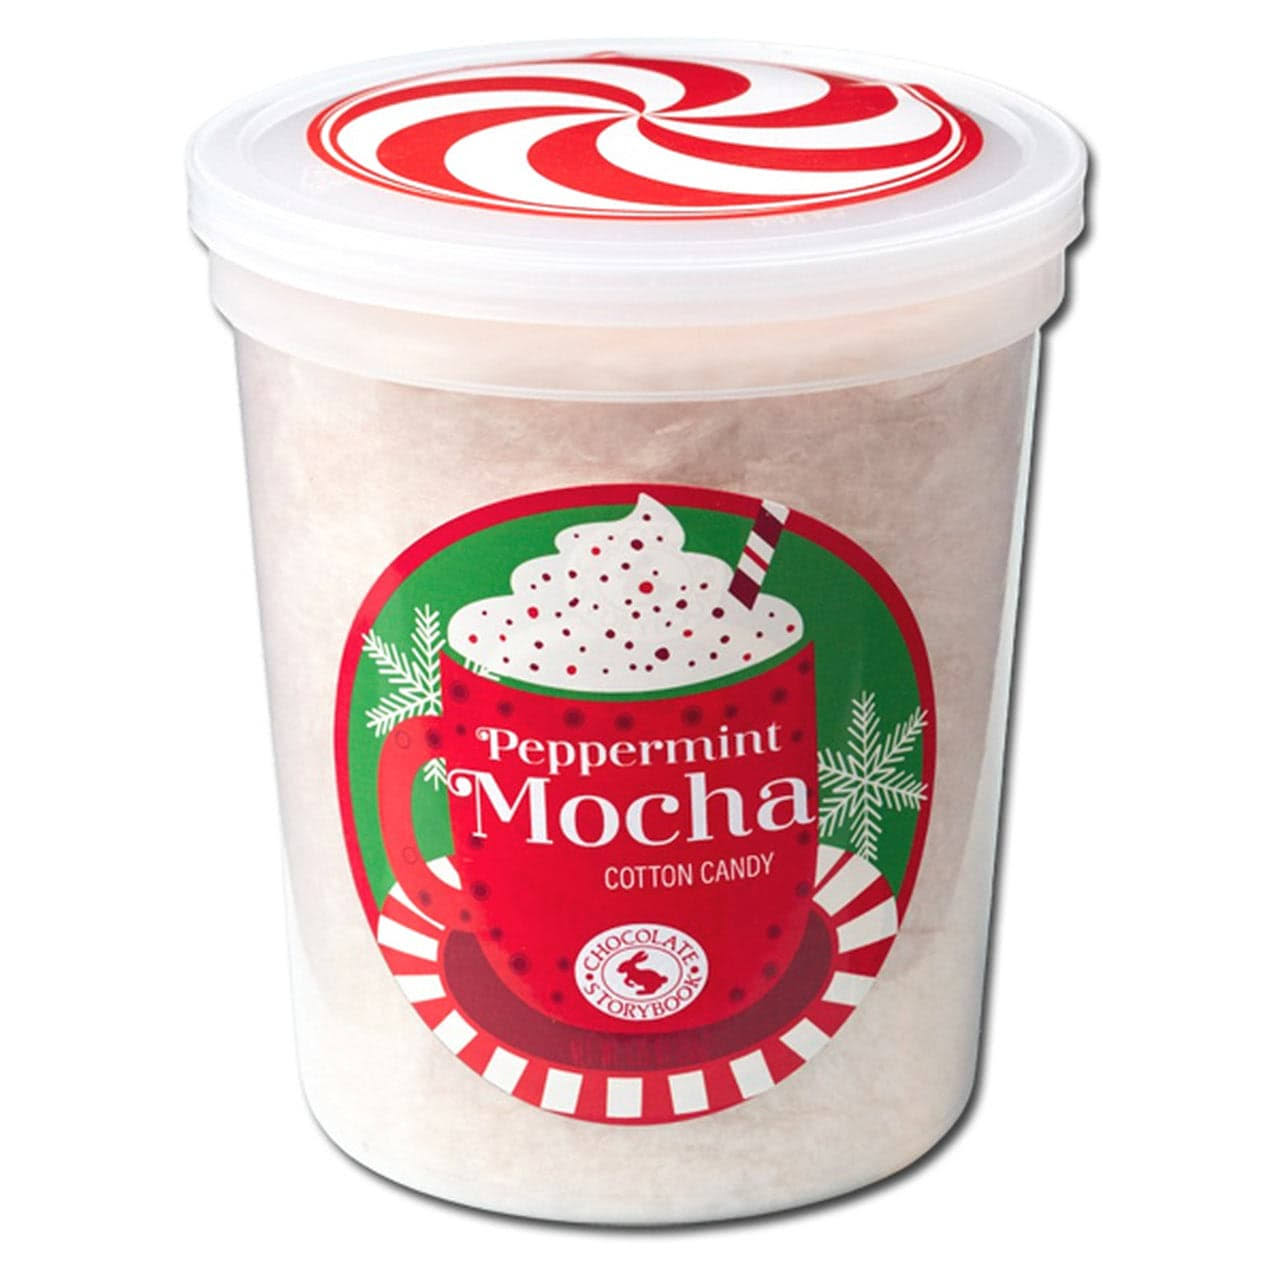 Chocolate Storybook Cotton Candy - Peppermint Mocha